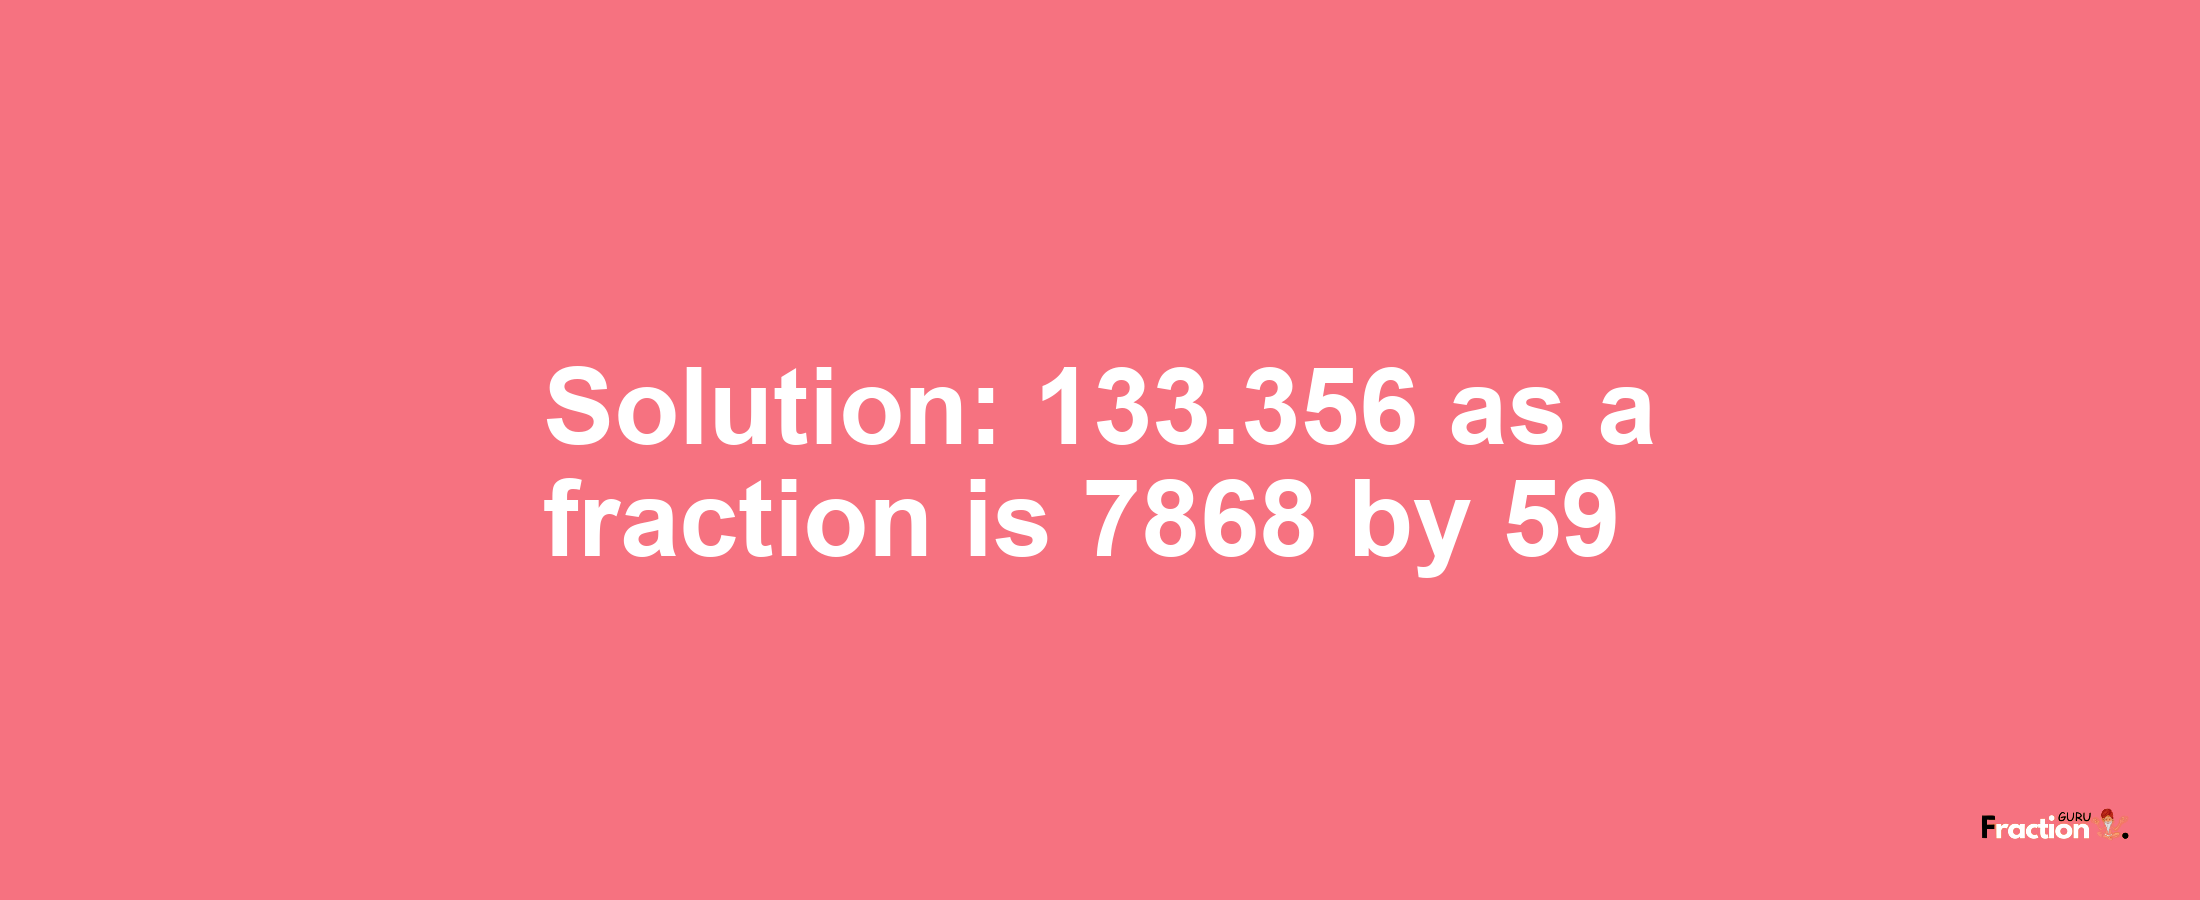 Solution:133.356 as a fraction is 7868/59